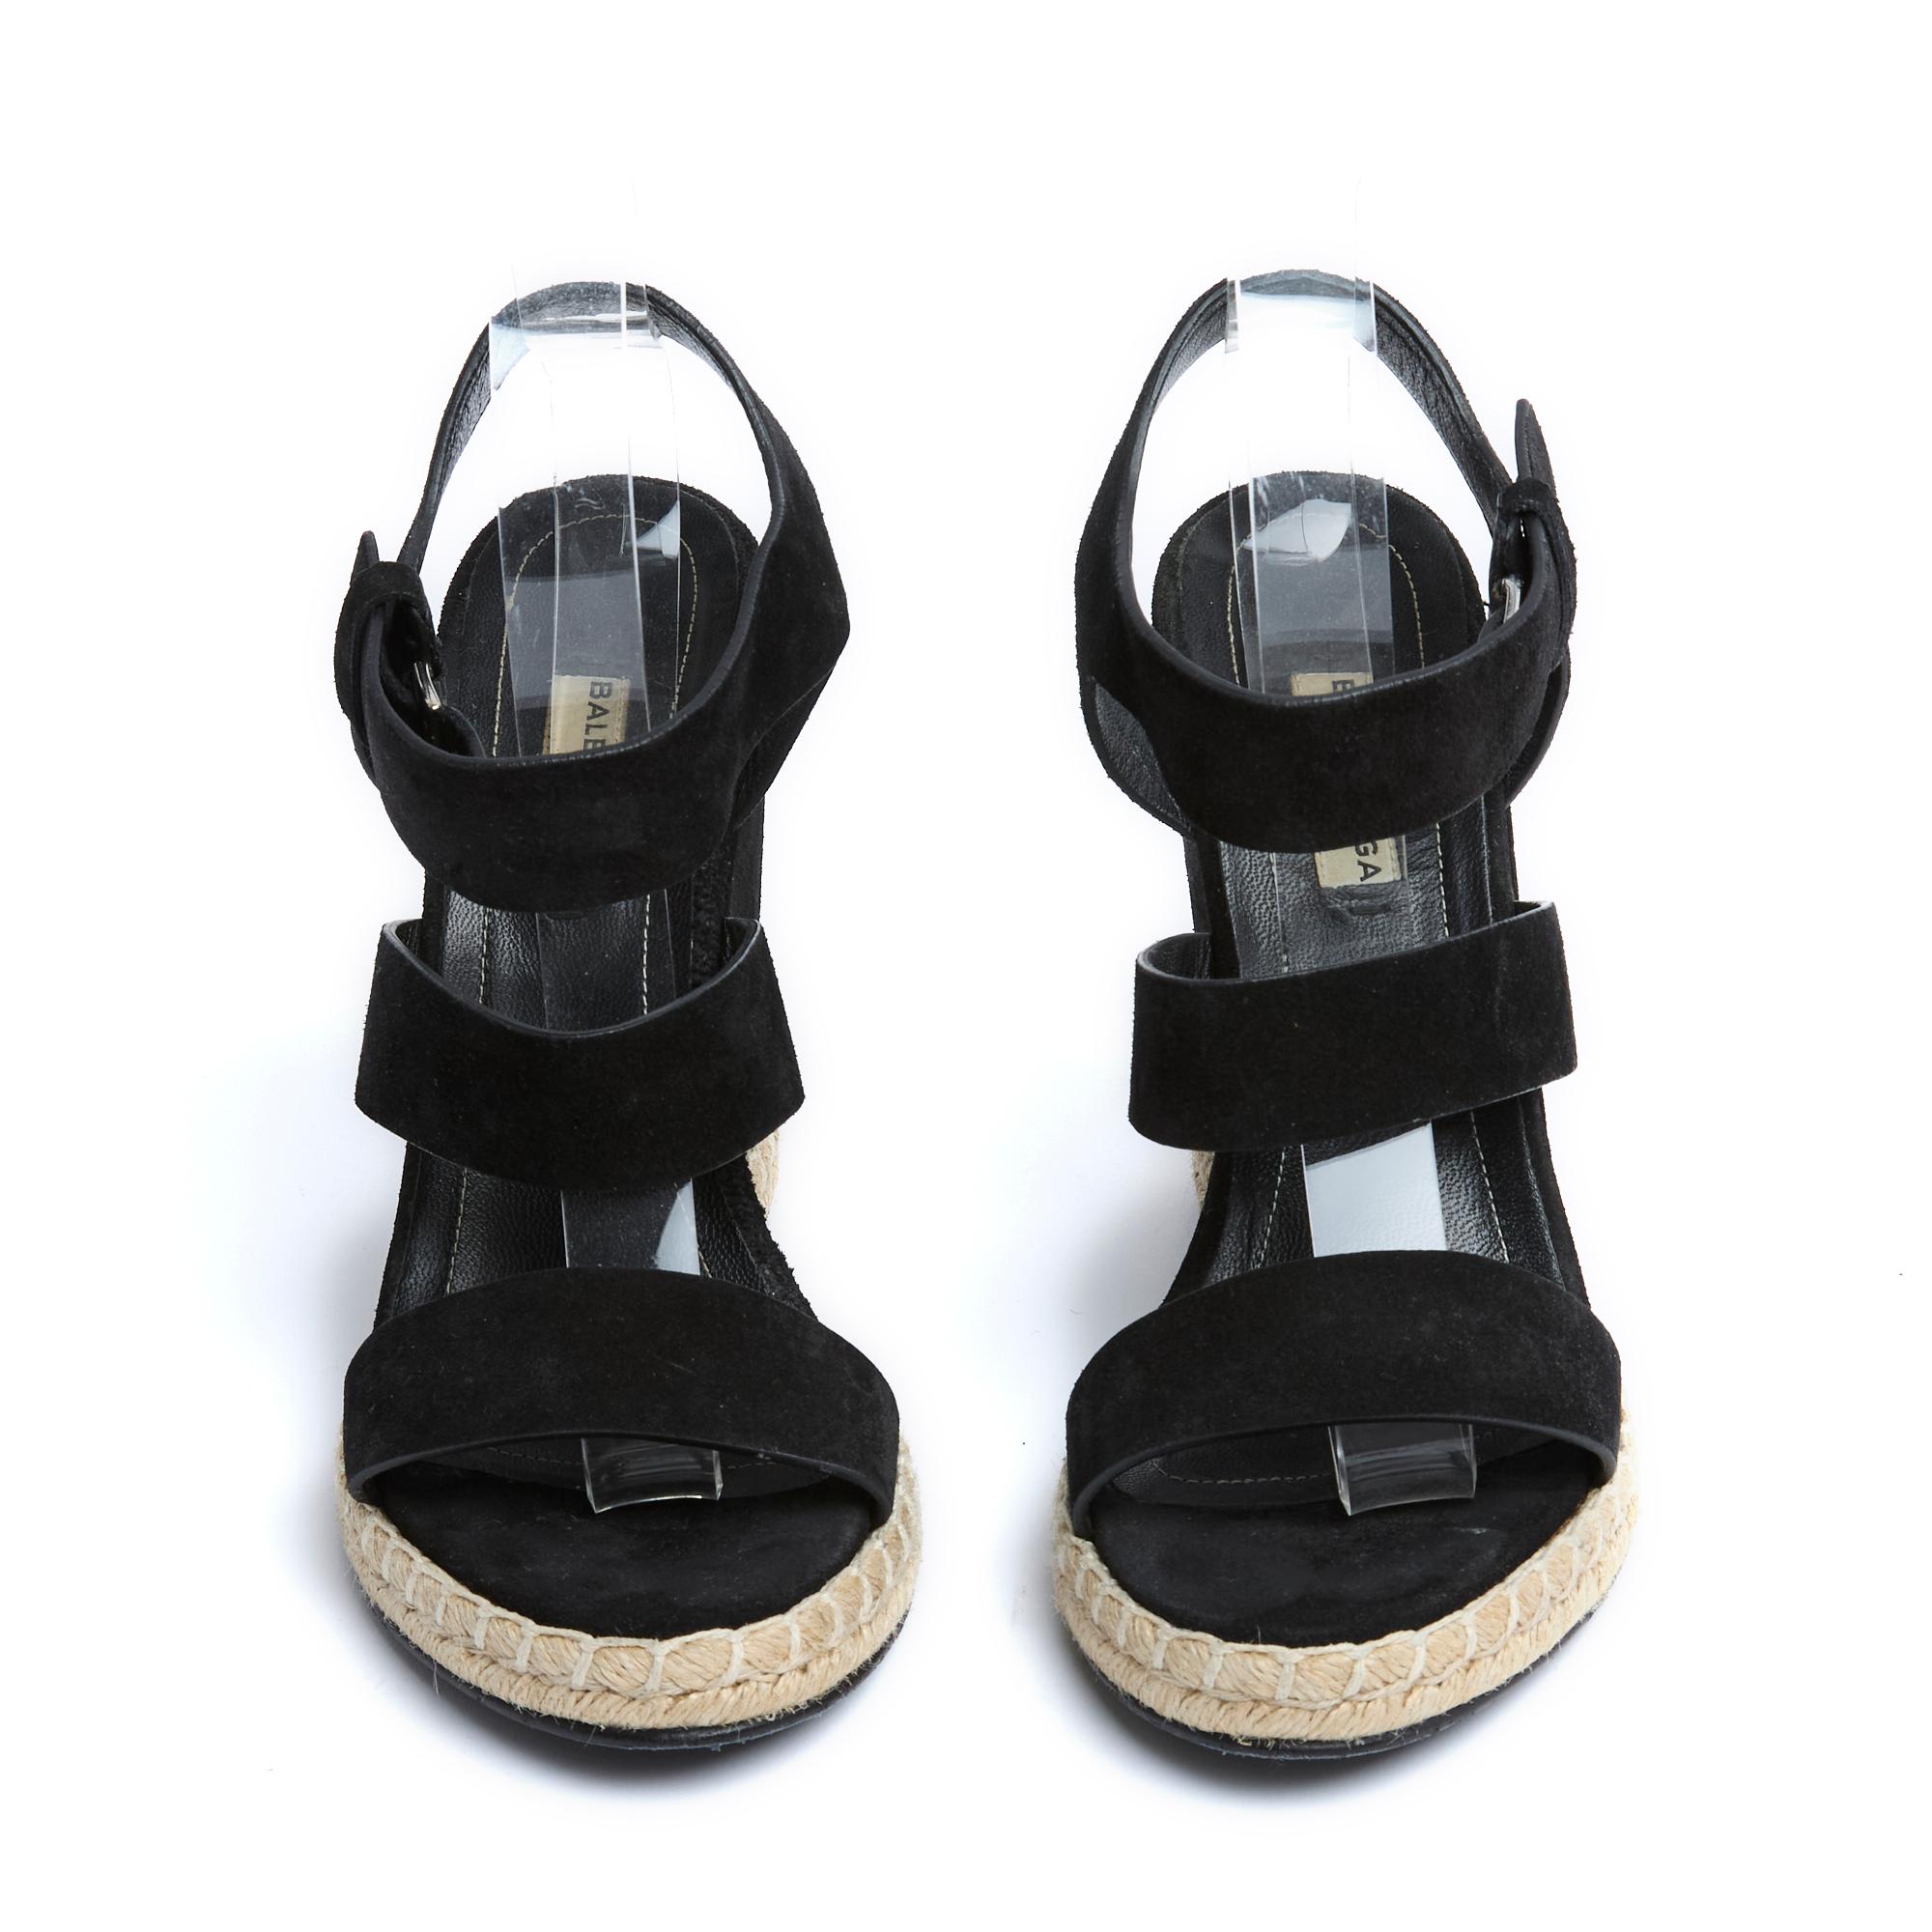 Balenciaga wedge sandals with wide soft straps in black suede lined with leather, heel covered in suede, 